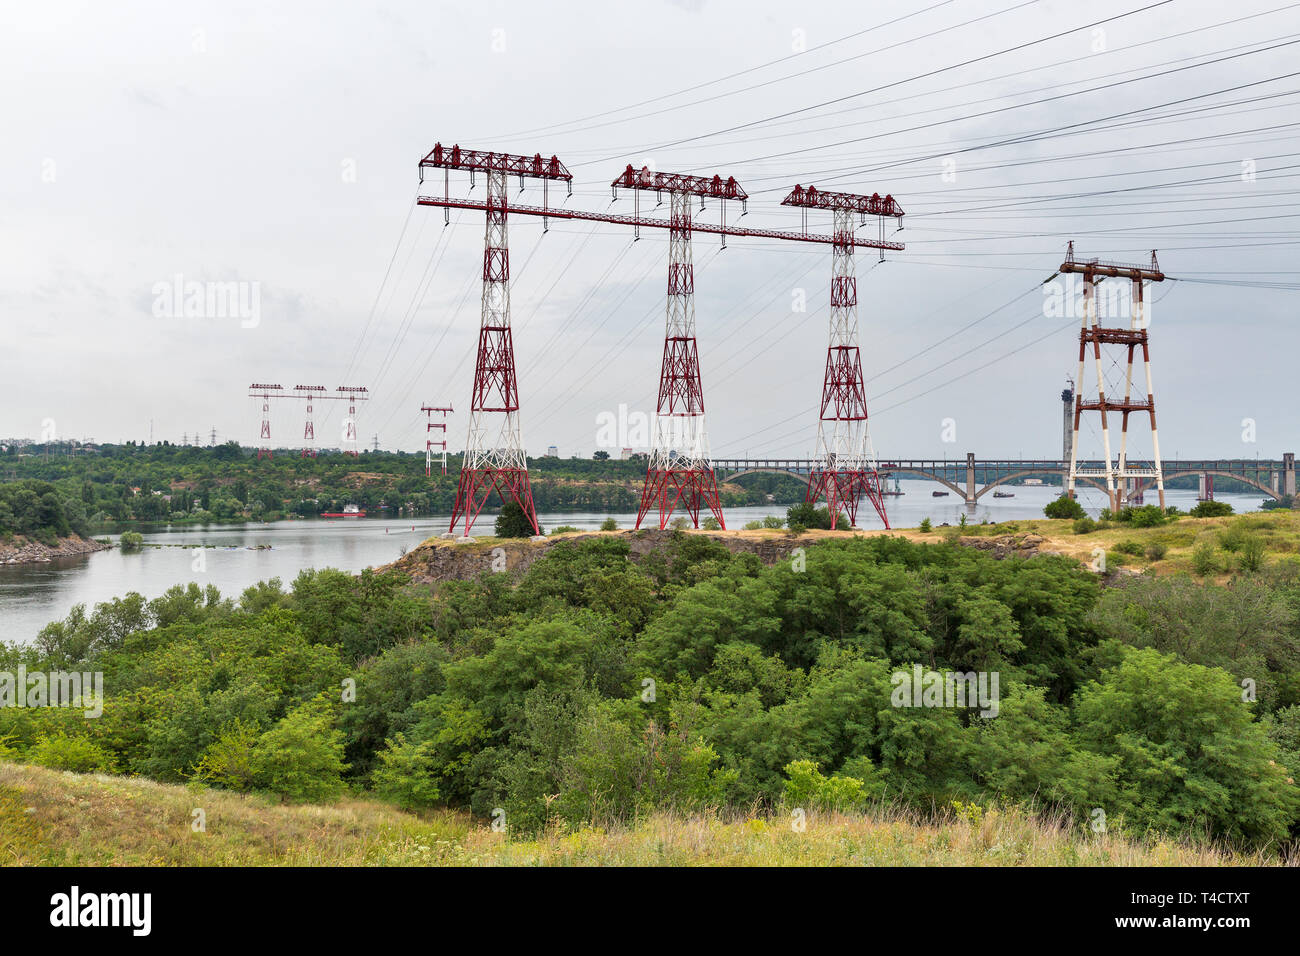 High voltage power lines towers on island of Khortytsia and Dnieper river in Ukraine. Stock Photo